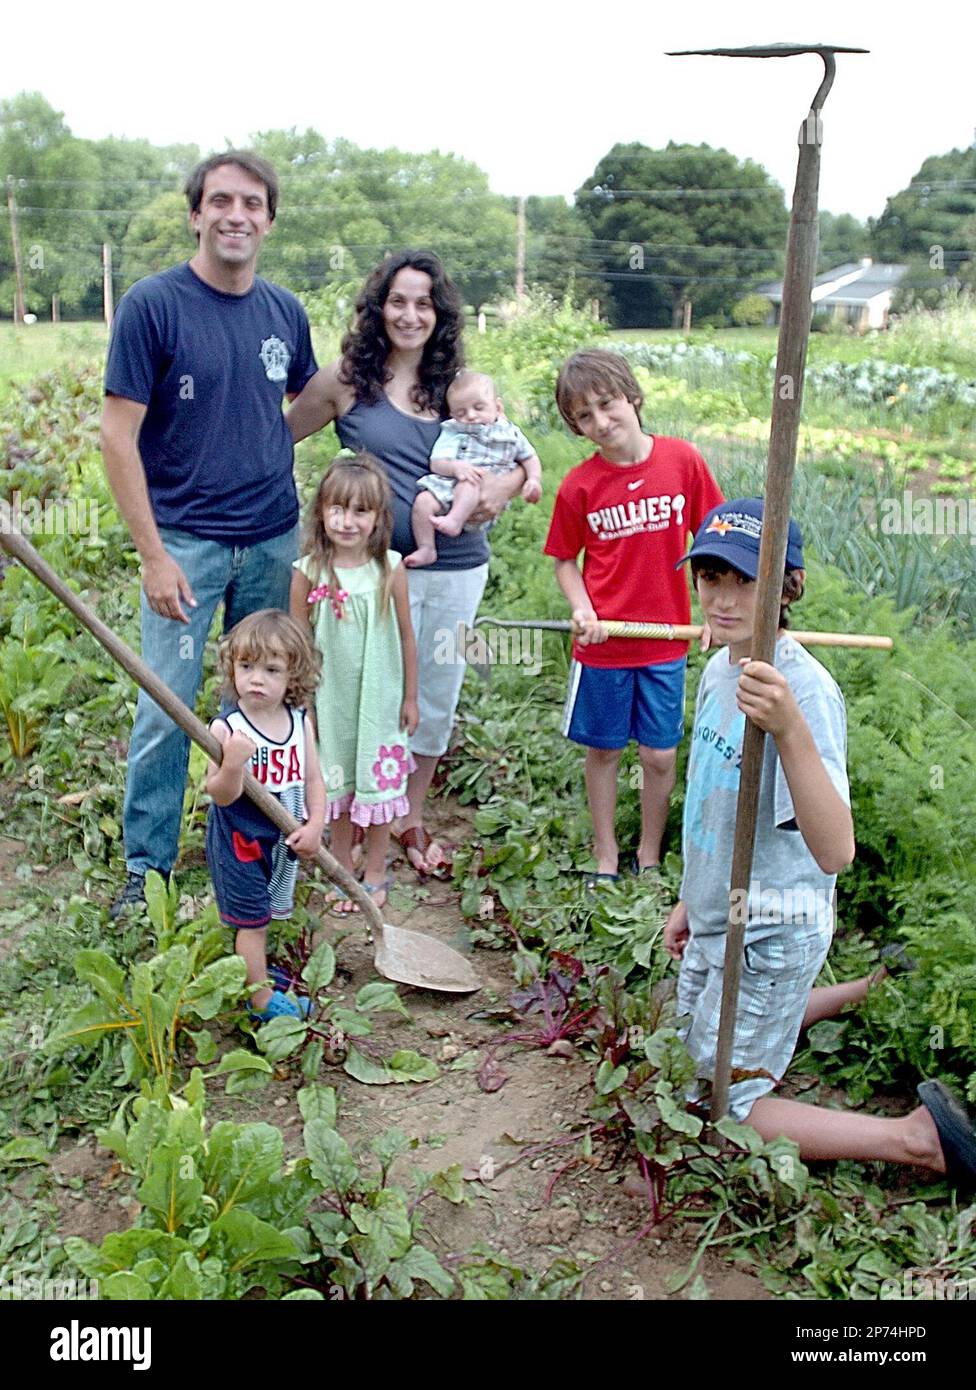 FOR RELEASE SATURDAY, JULY 23, 2011, AT 12:09 A.M. EDT - In this photo  taken July 8, 2011, Shawn and wife Geralyn Touhill with their children,  Shawn Jr,, 3-months, daughter Hayden, 5